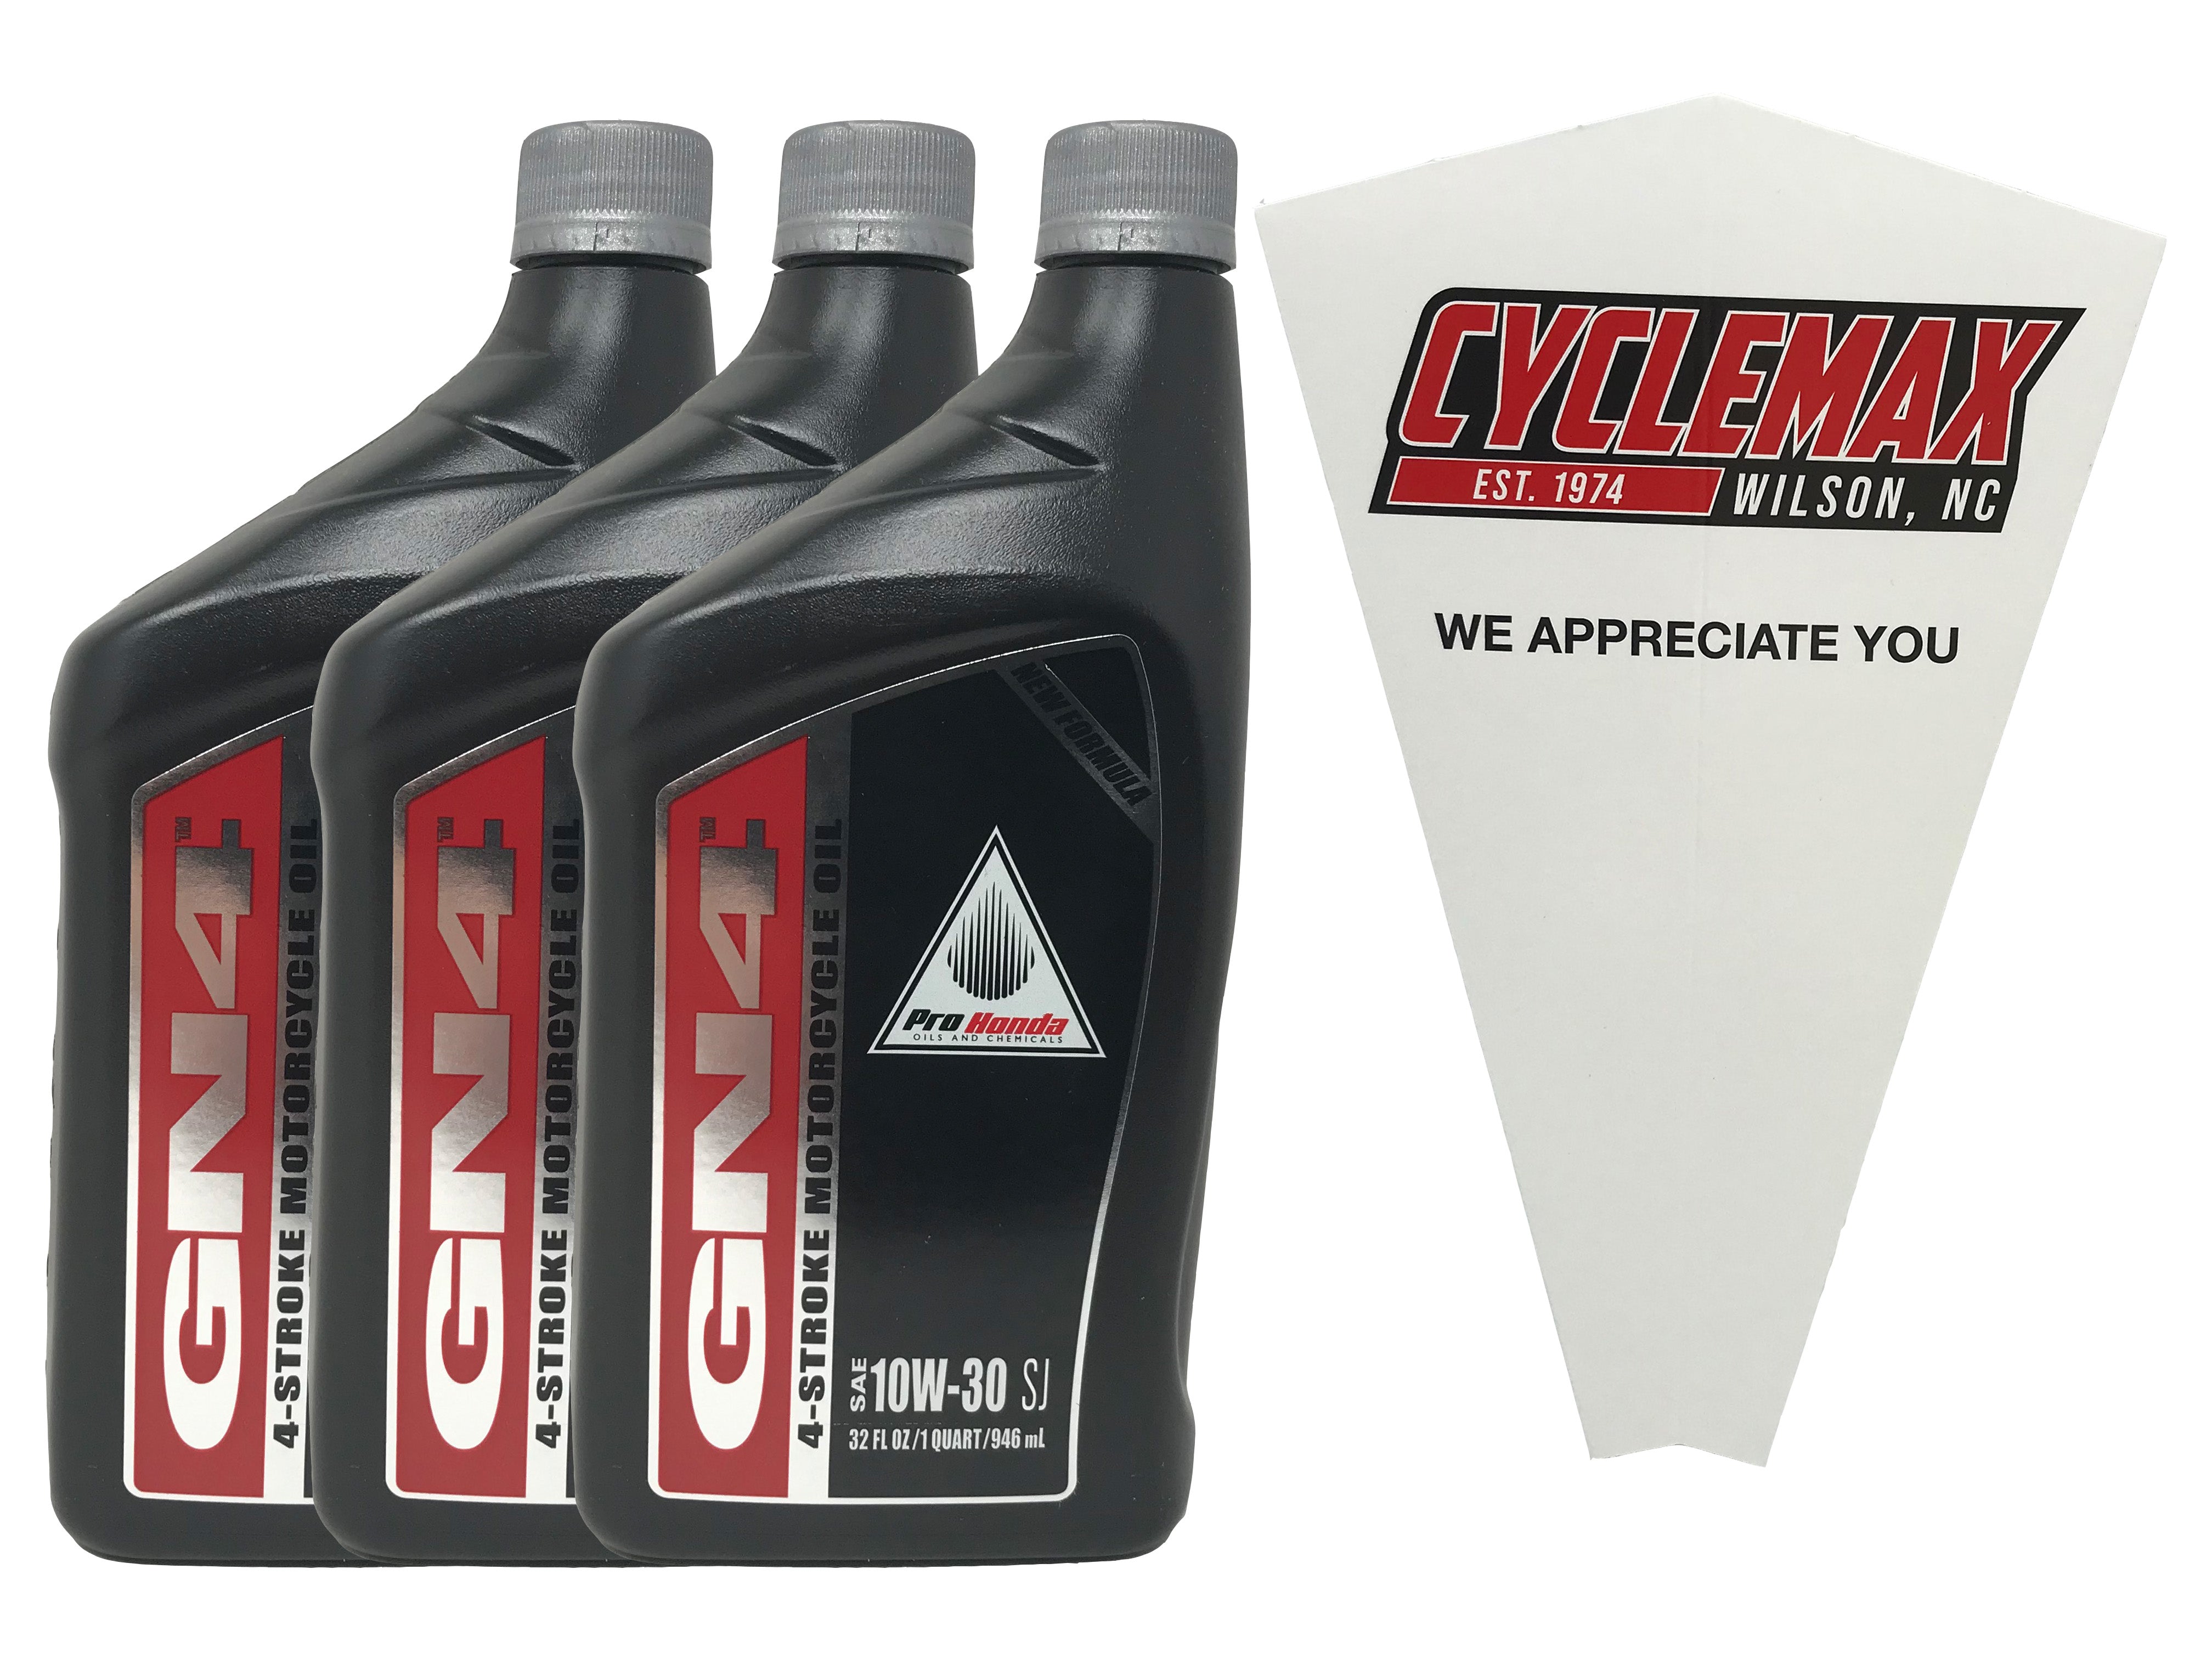 Cyclemax Three Pack for Honda GN4 10w30 4-Stroke Engine Oil 08C35-A131M02 Contains Three Quarts and a Funnel